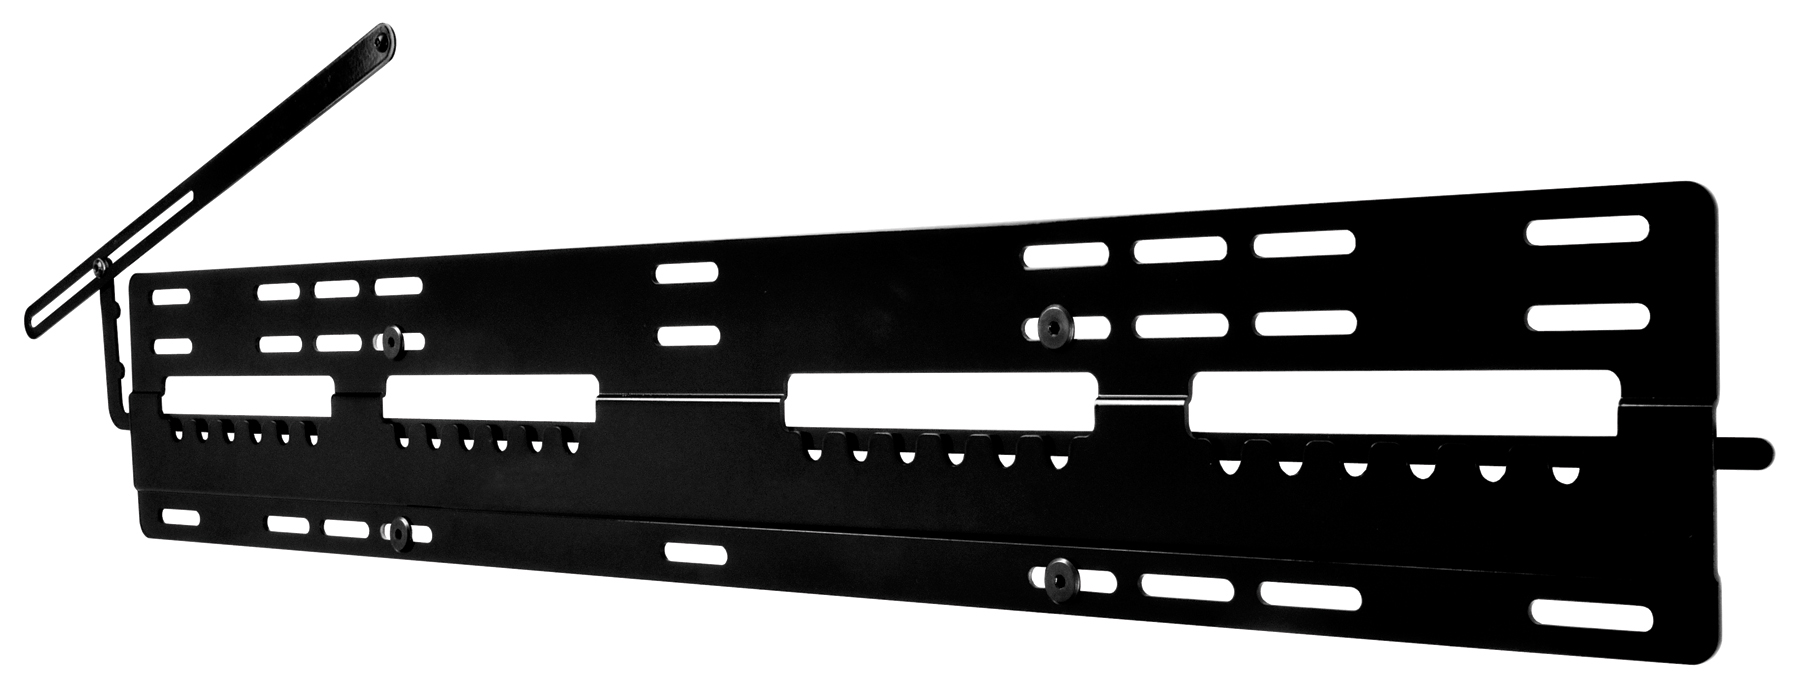 SUF661 DesignerSeries Universal Ultra Slim Flat Wall Mount for 40" to 80" Ultra-thin Displays